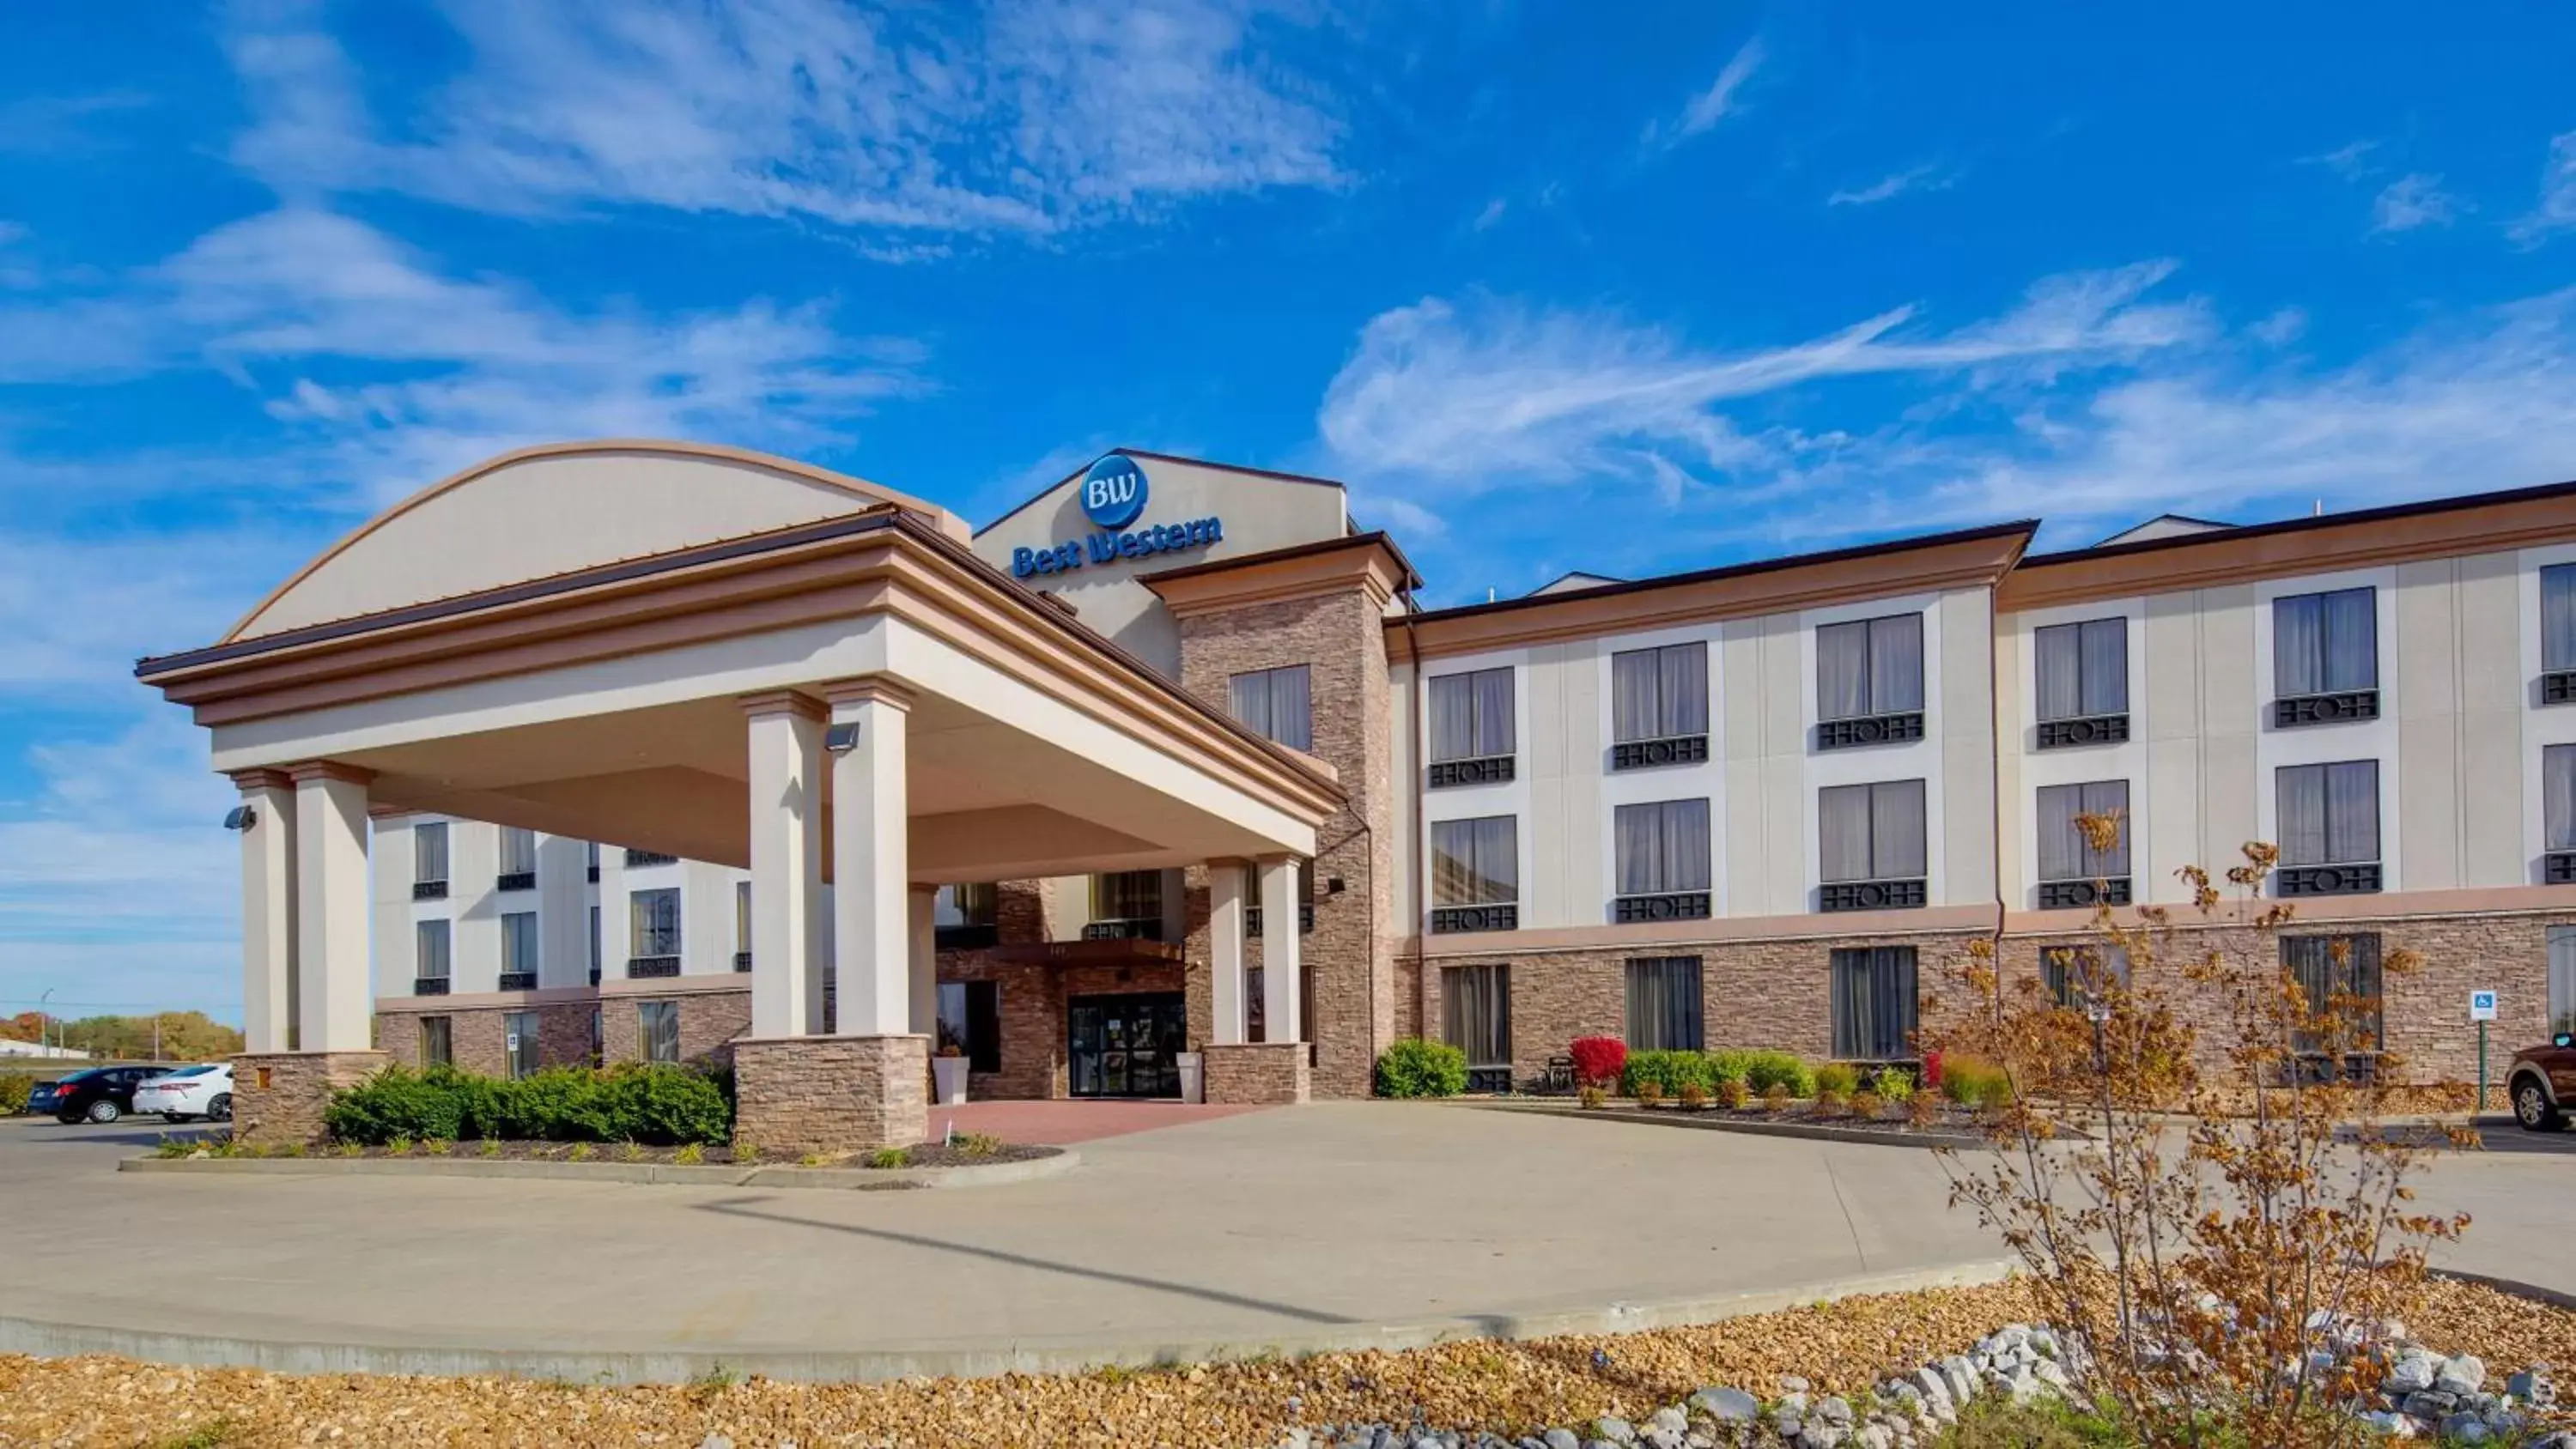 Property Building in Best Western St. Louis Airport North Hotel & Suites